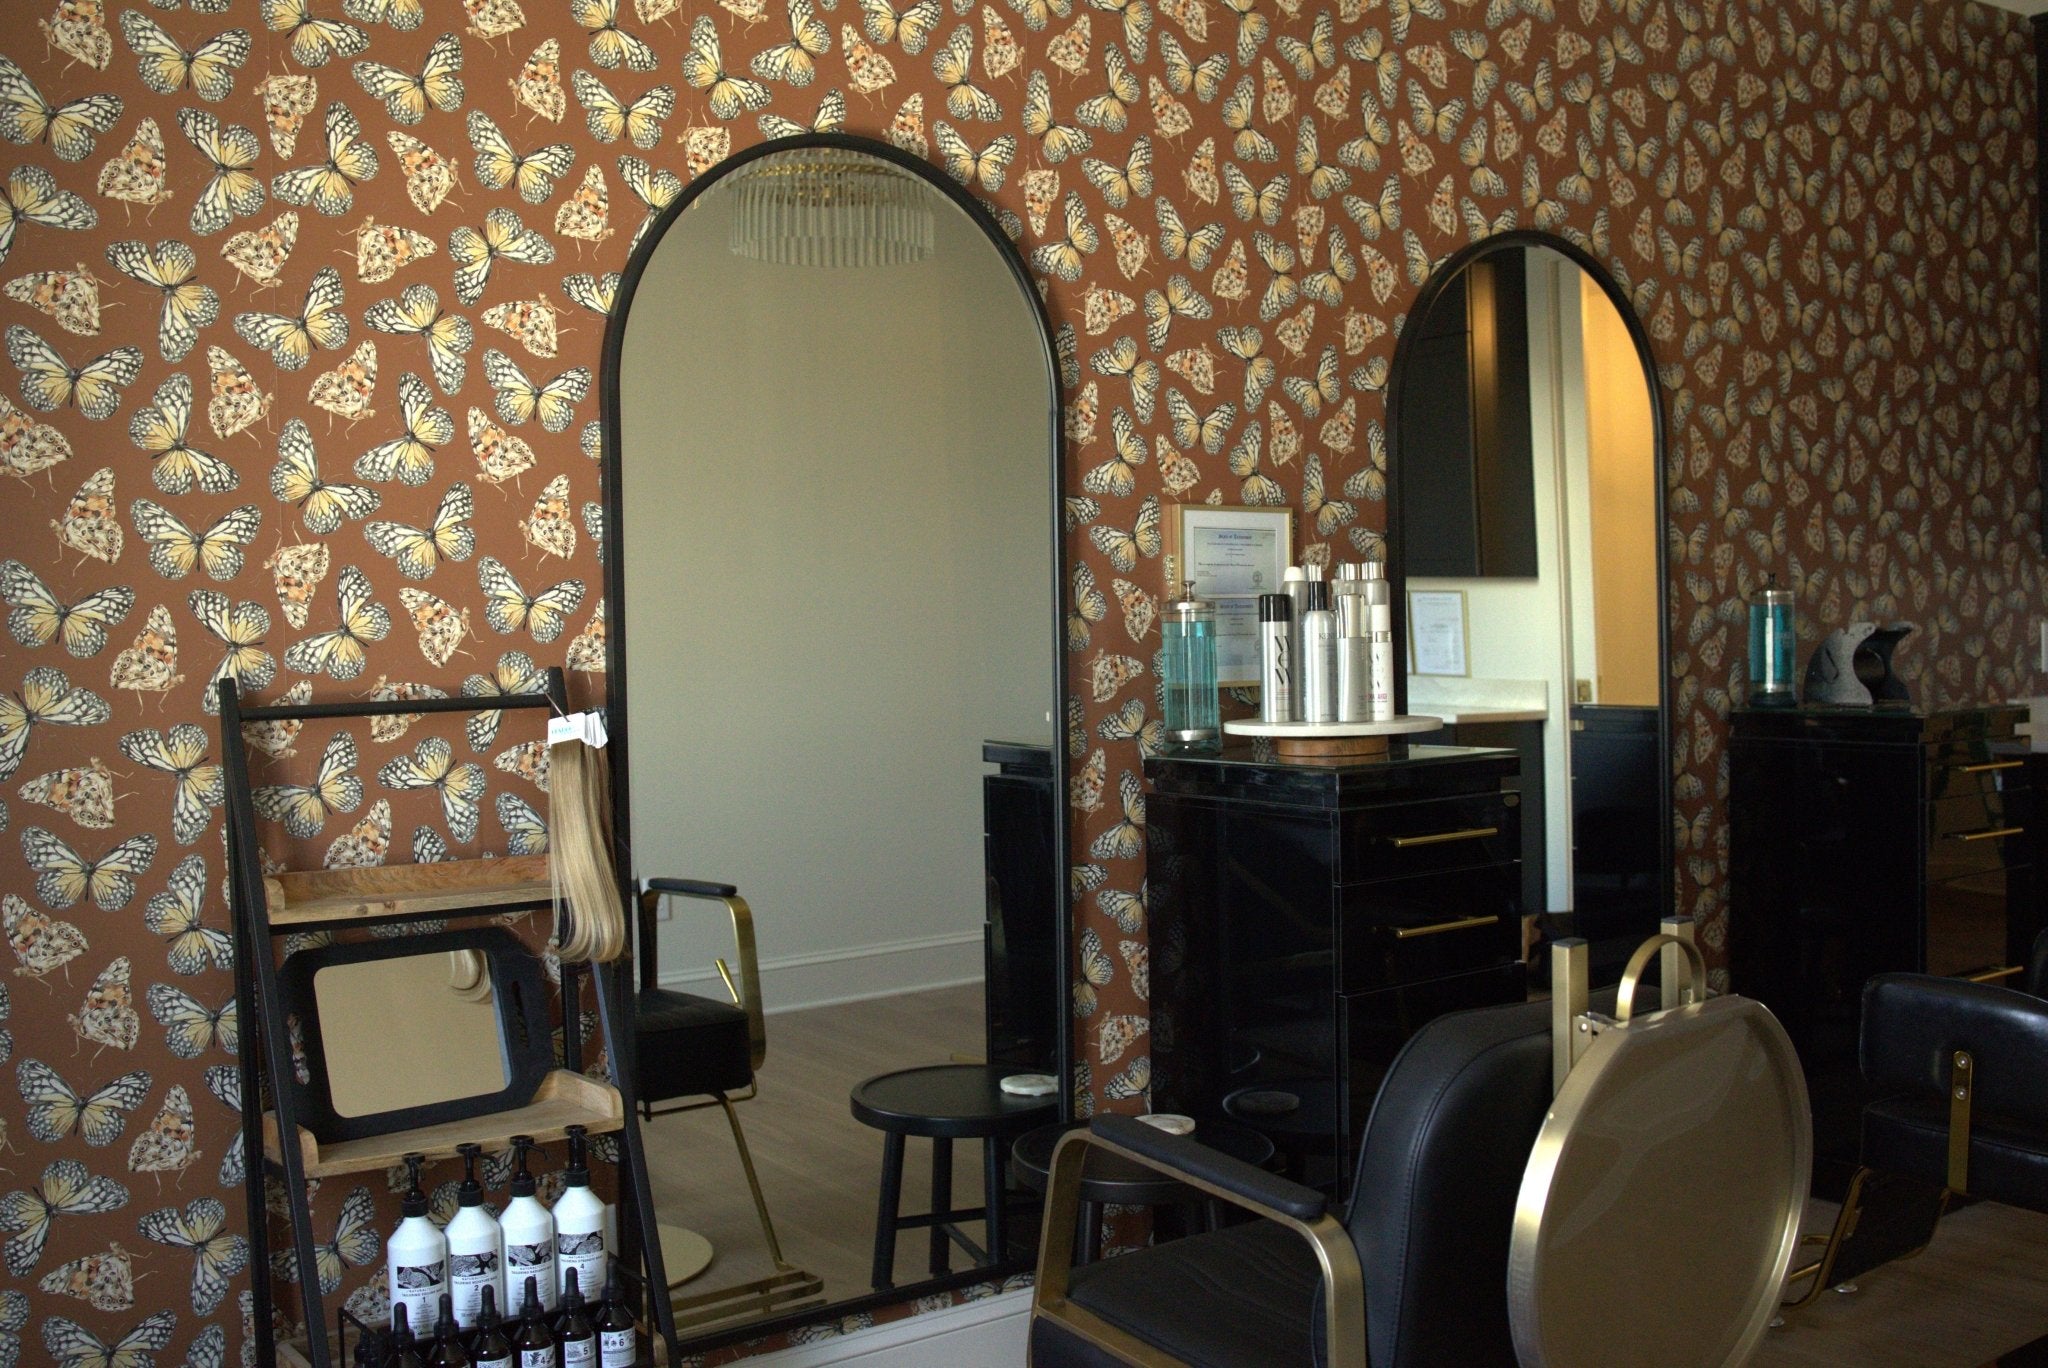 Decorating a hair salon using peel and stick removable wallpaper with butterfly design